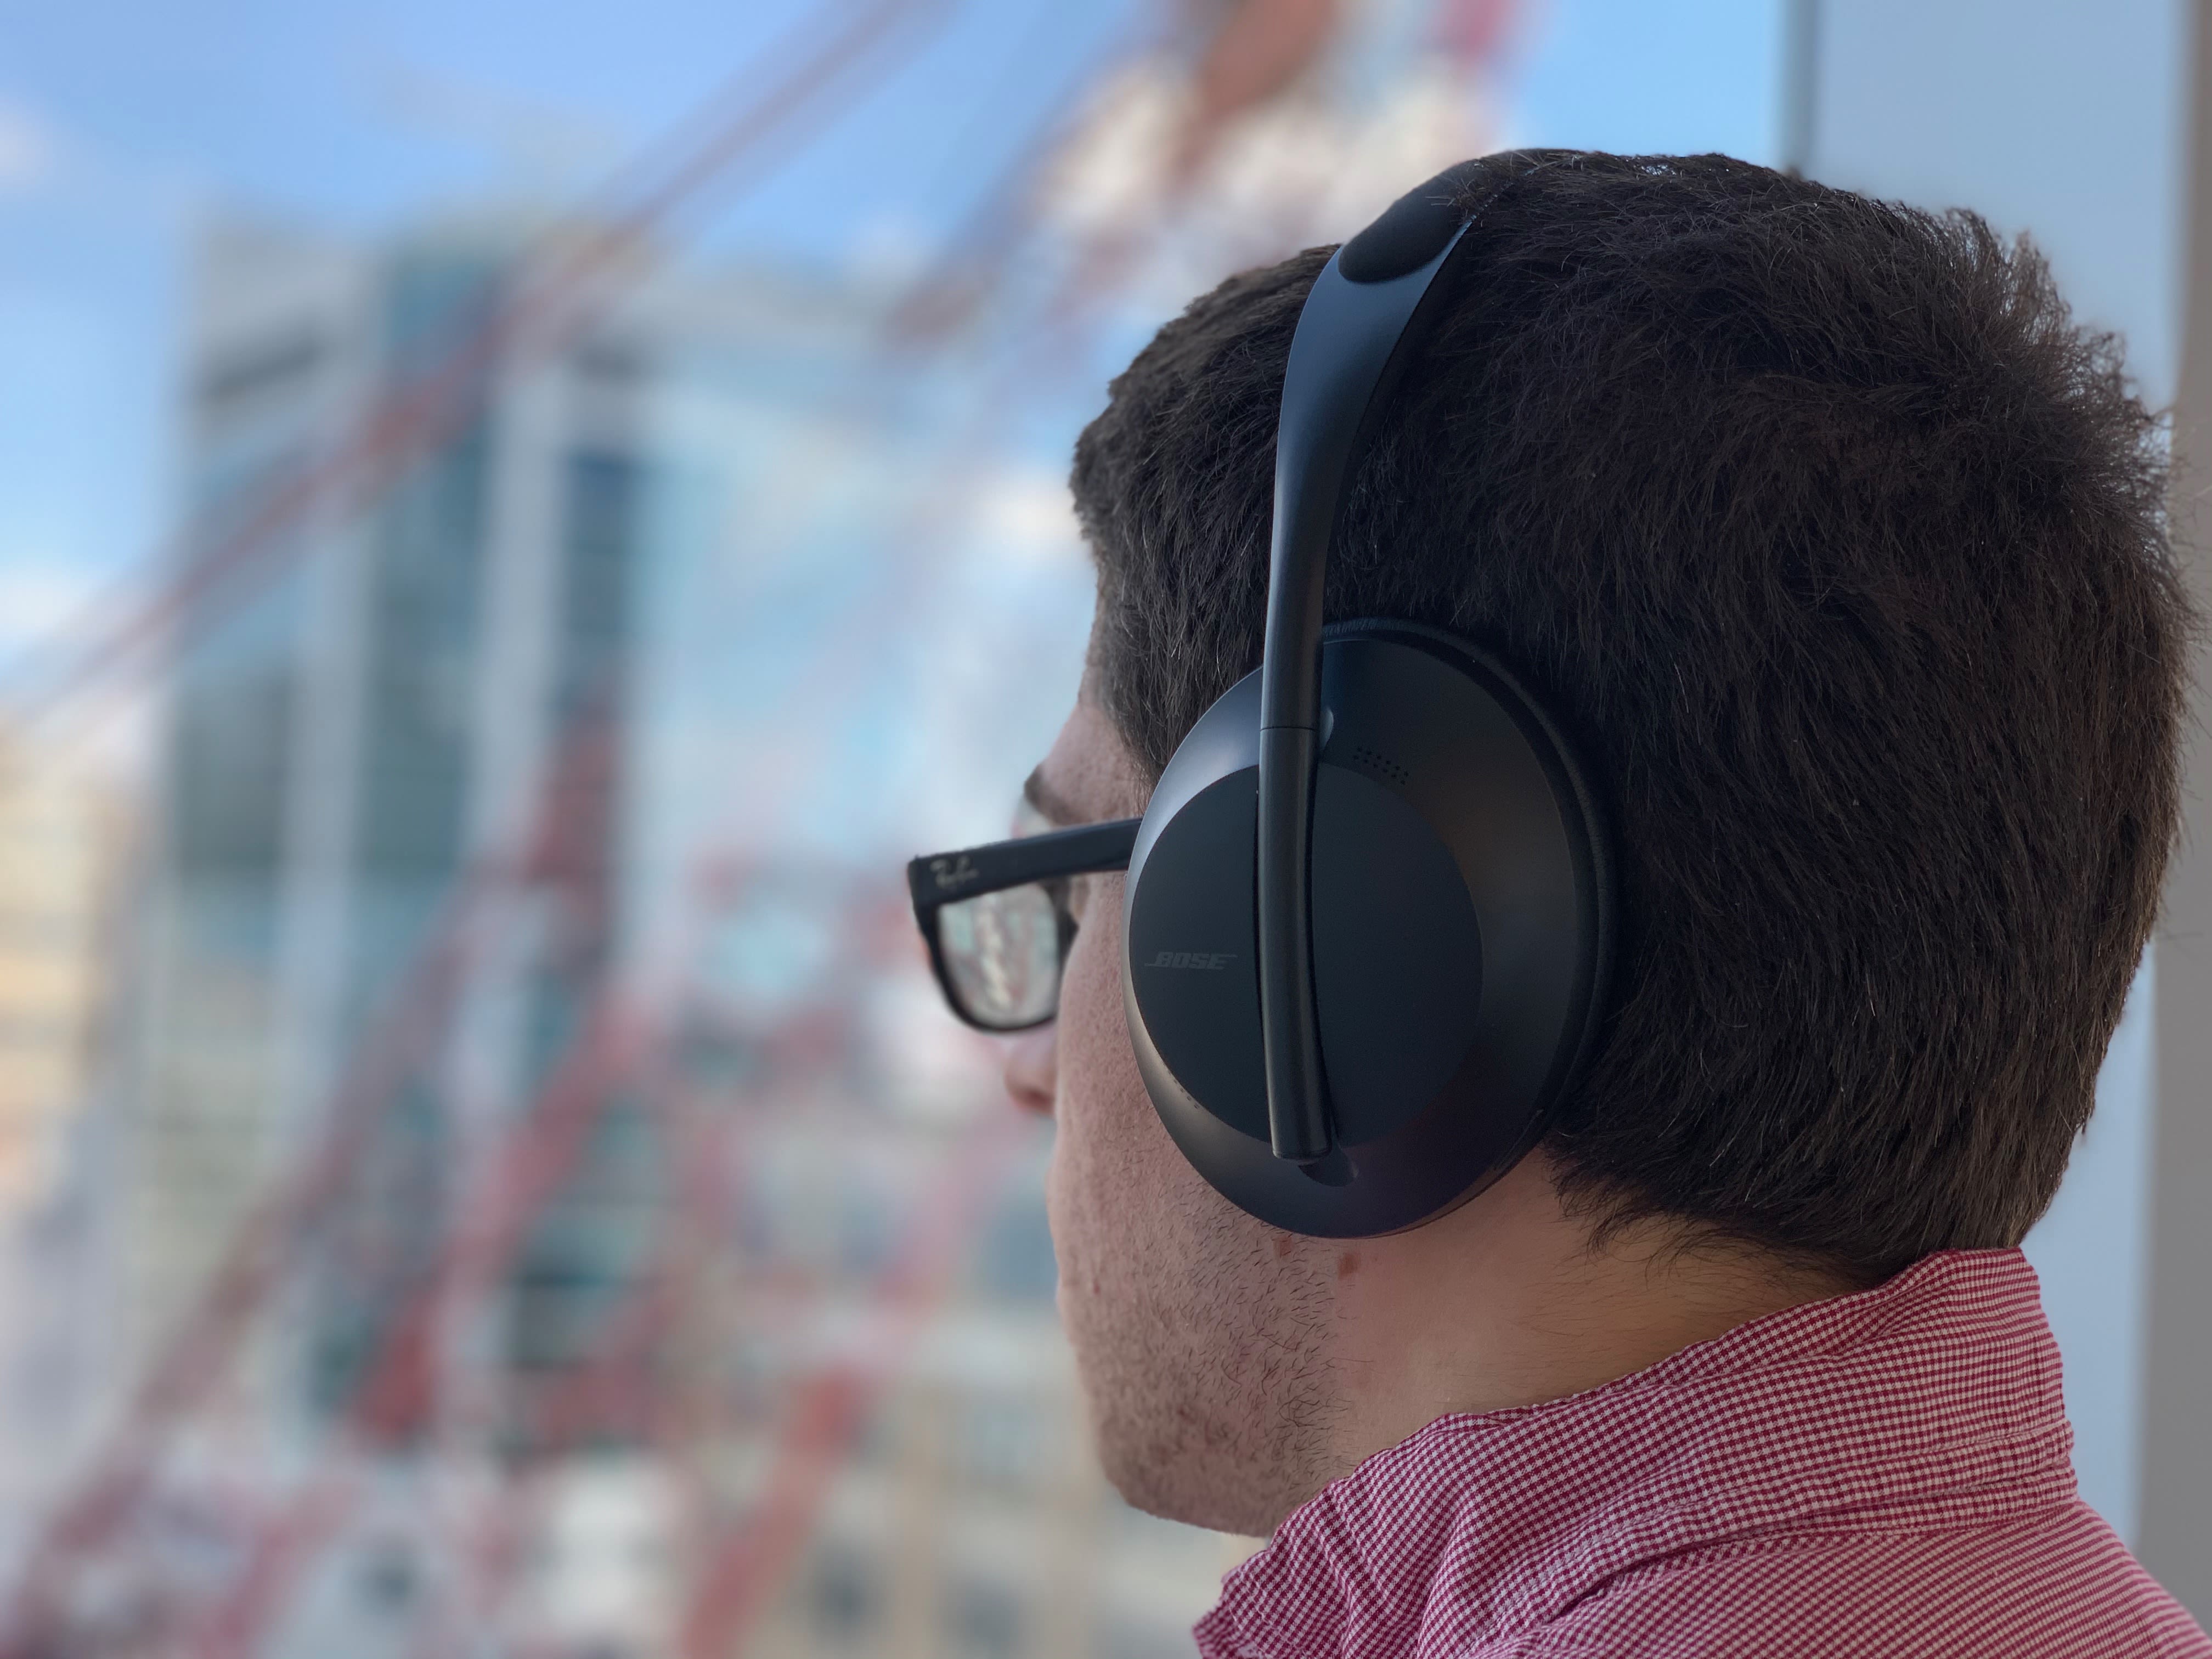 Bose Noise Cancelling Headphones 700 review: Bose's best-ever